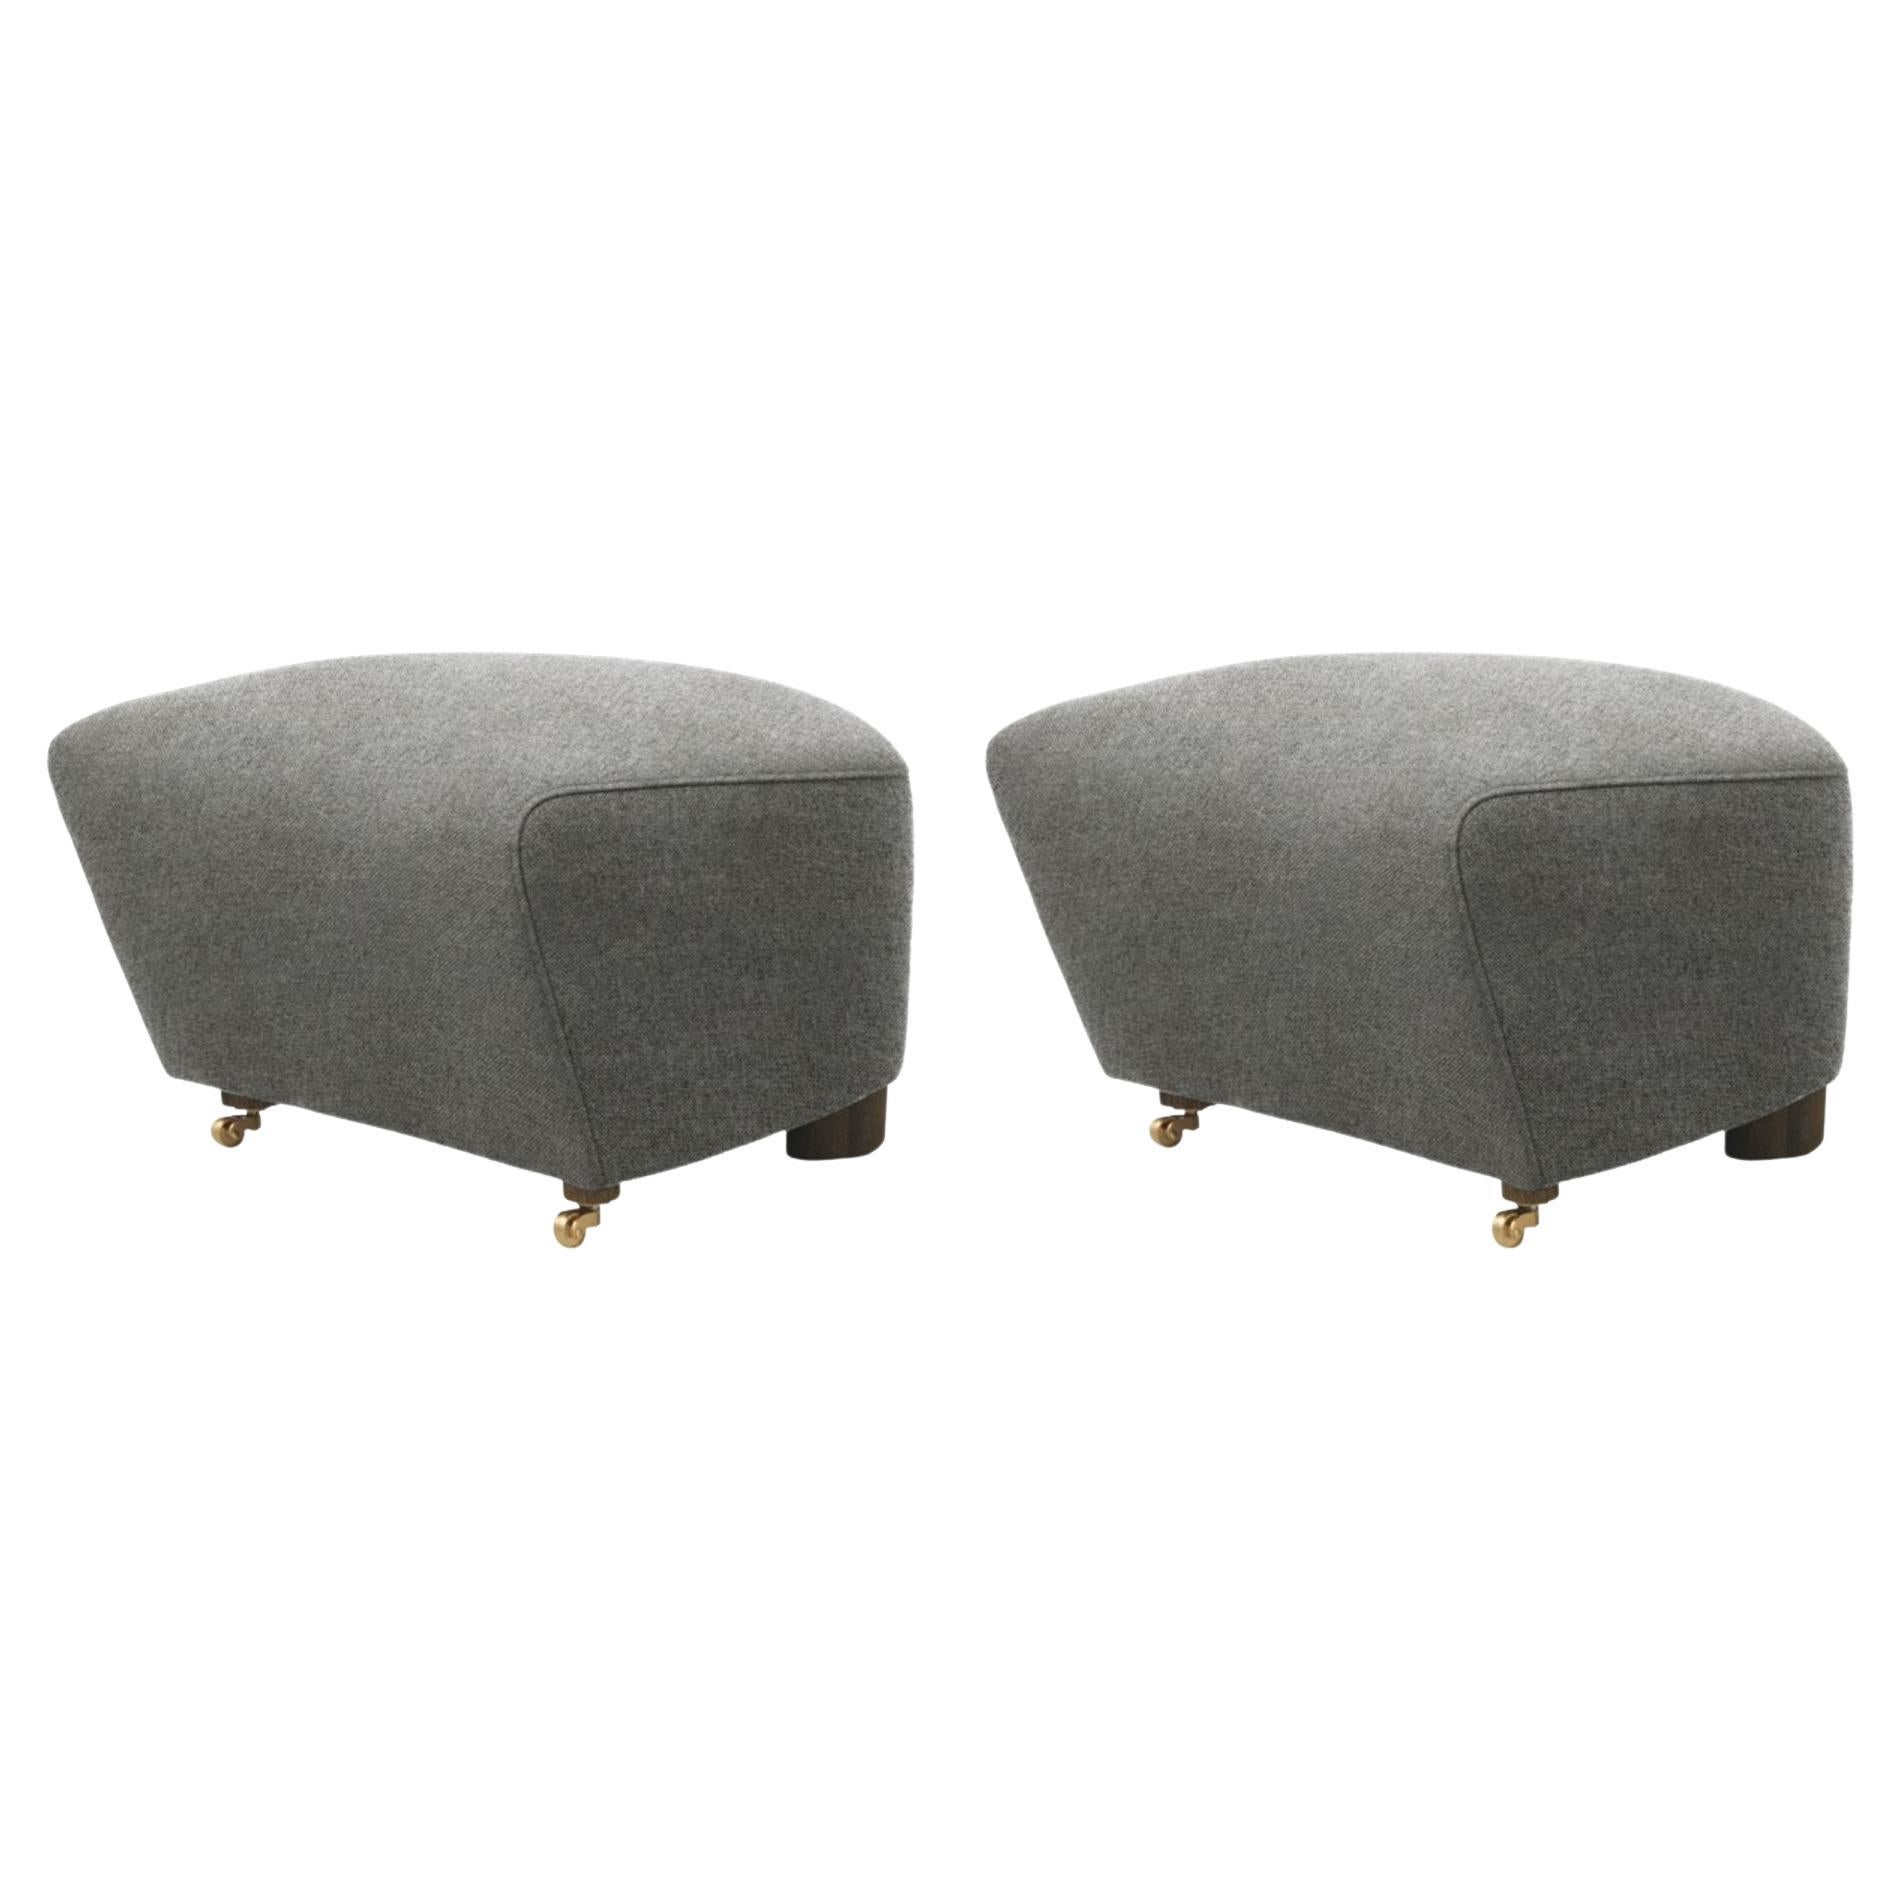 Set of 2 Grey Smoked Oak Hallingdal the Tired Man Footstools by Lassen For Sale